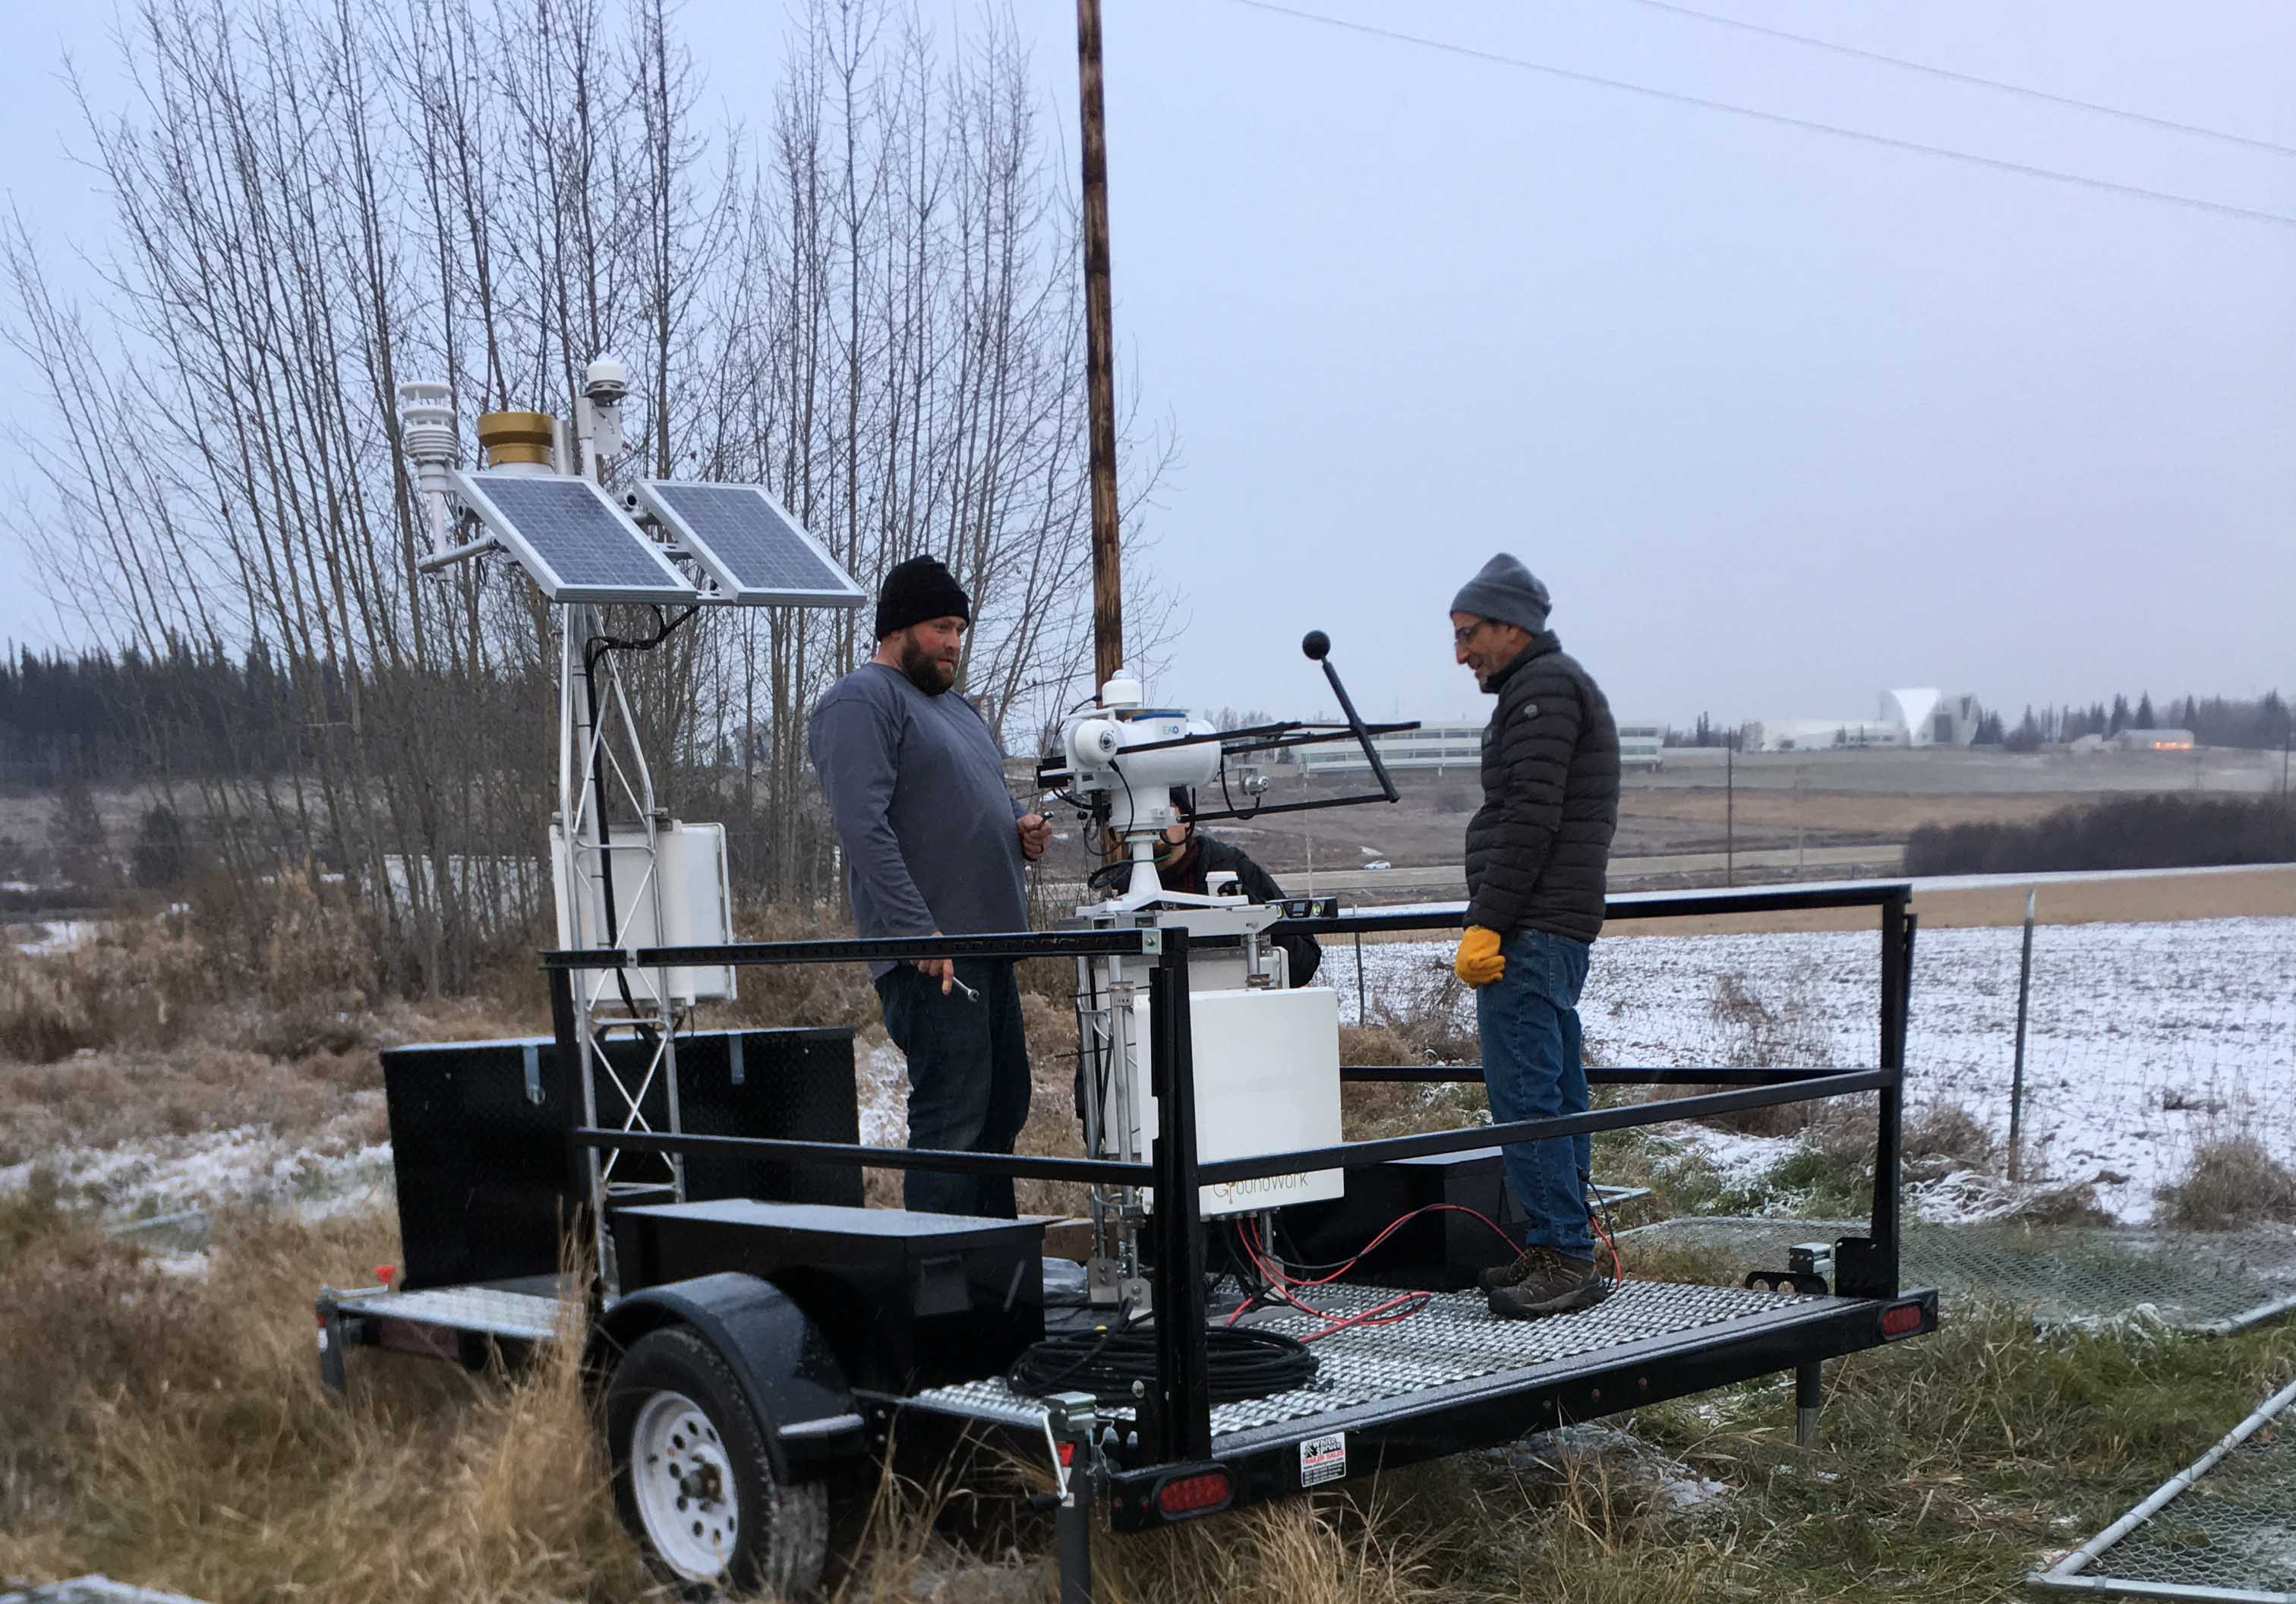 Meteorological Installation at Solar PV Test Site Measures Irradiance